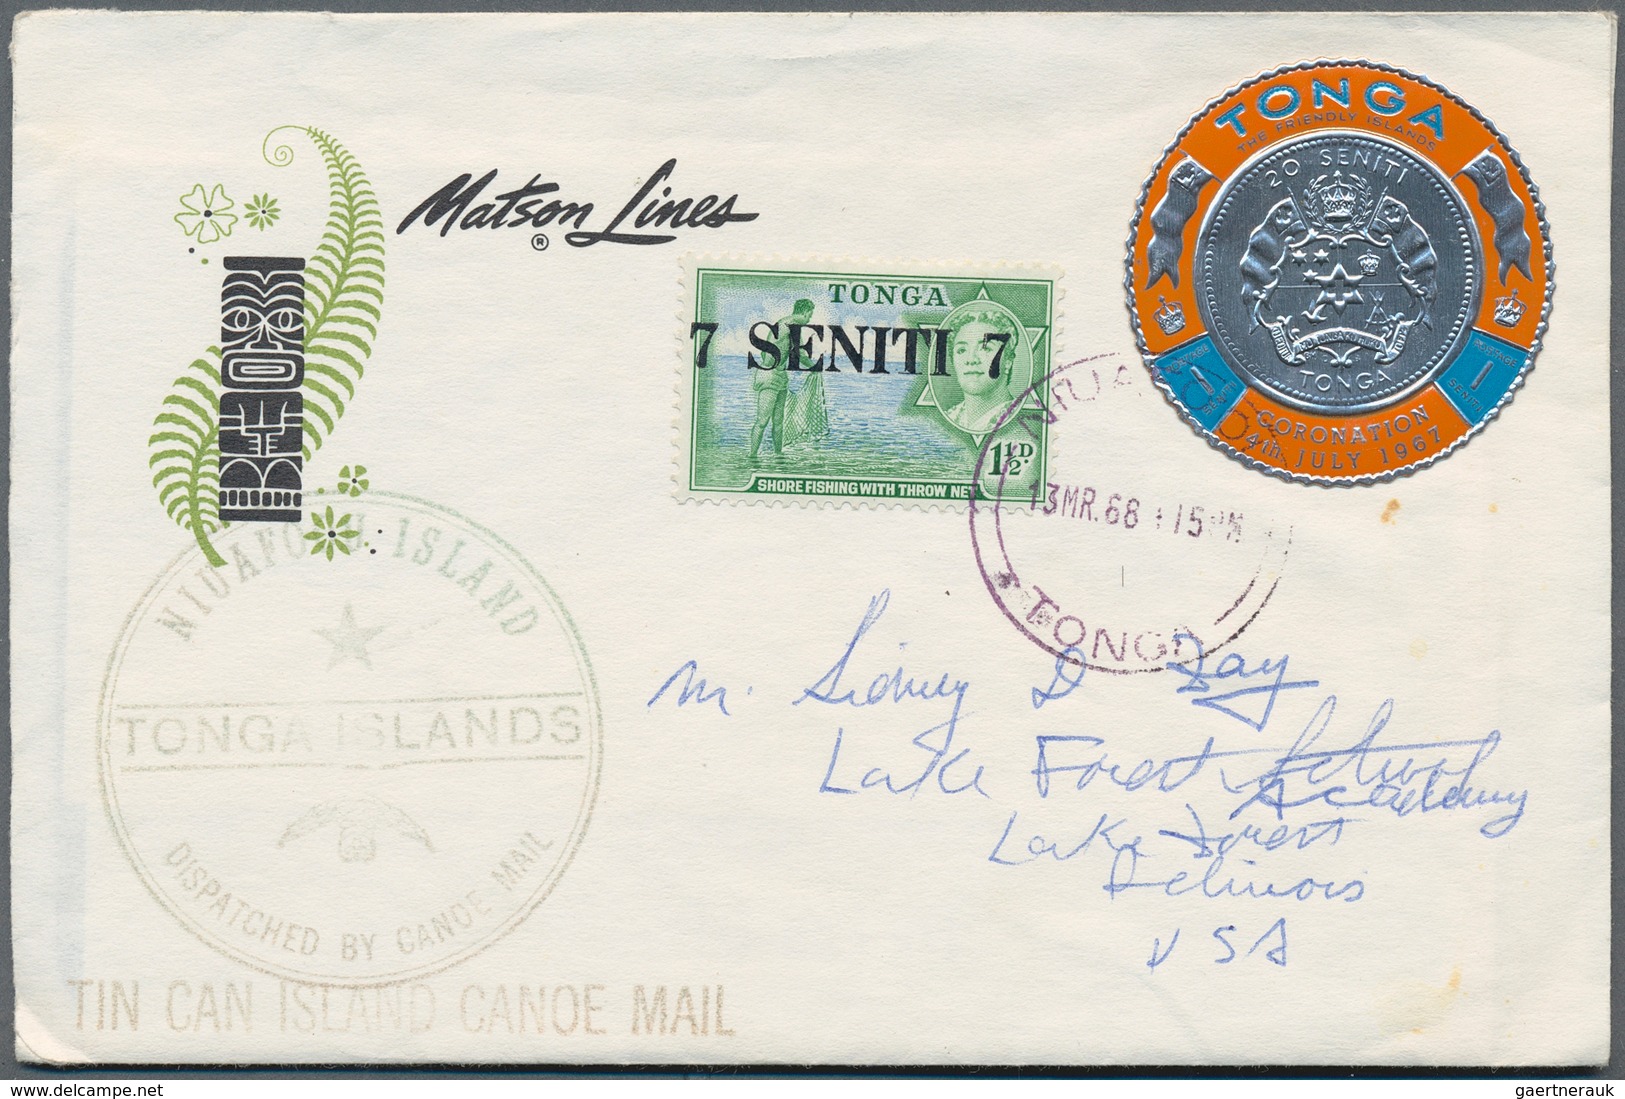 Tonga: 1923/70, covers (8, inc. tin-can mail x5, 1934/35 and 1968/69), 1900 reg. stationery (uprate